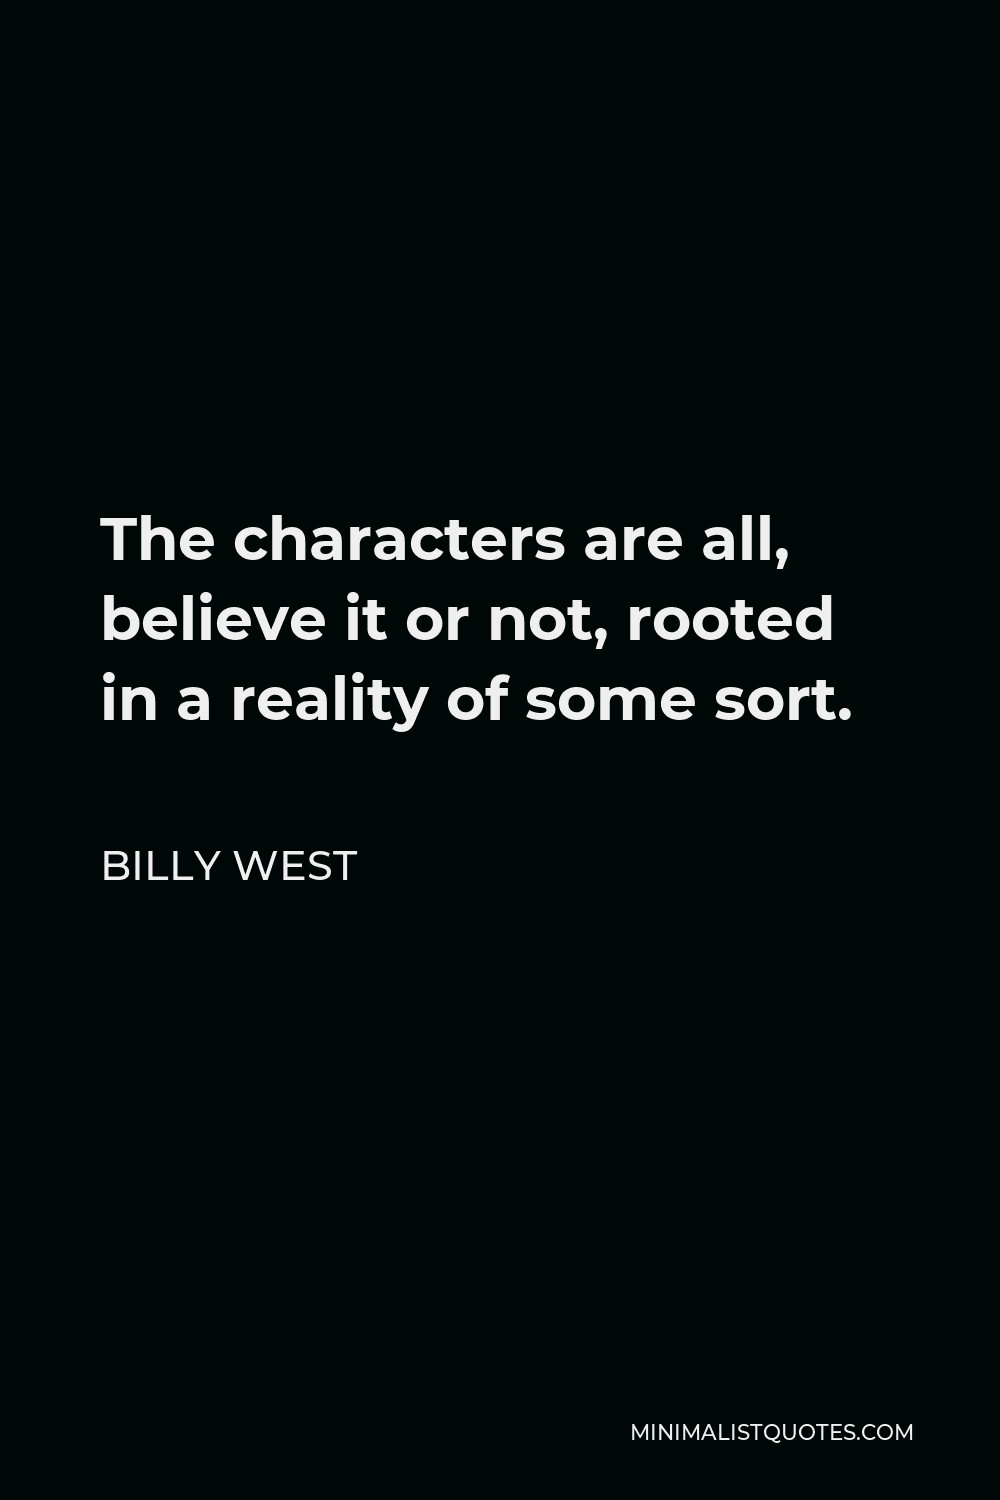 Billy West Quote - The characters are all, believe it or not, rooted in a reality of some sort.